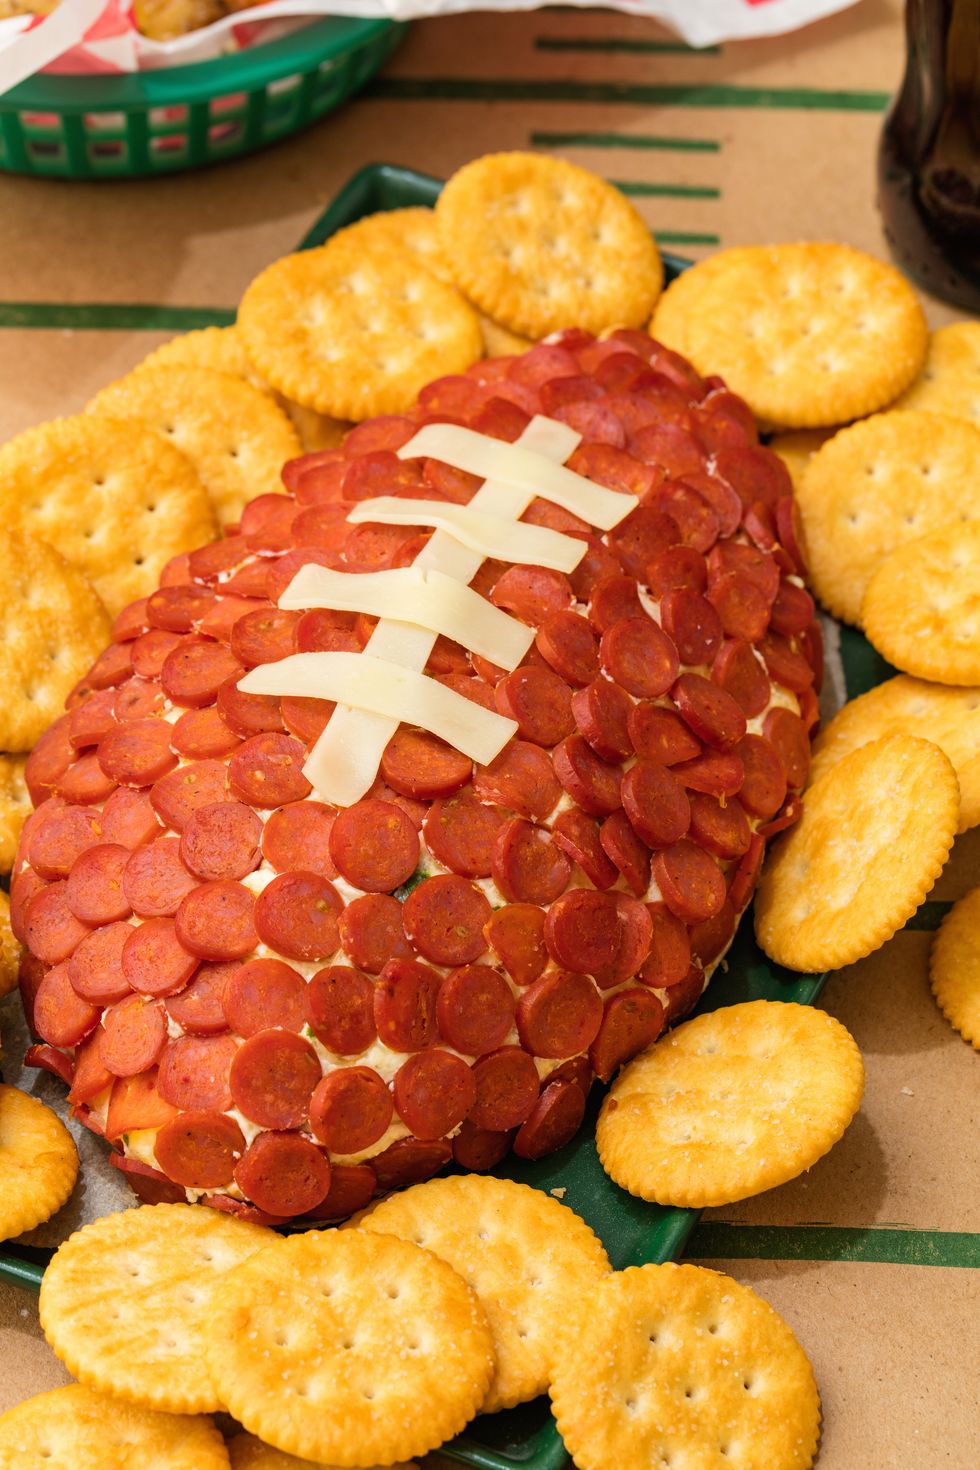 15 Best Football-Shaped Foods - Super Bowl Party Foods